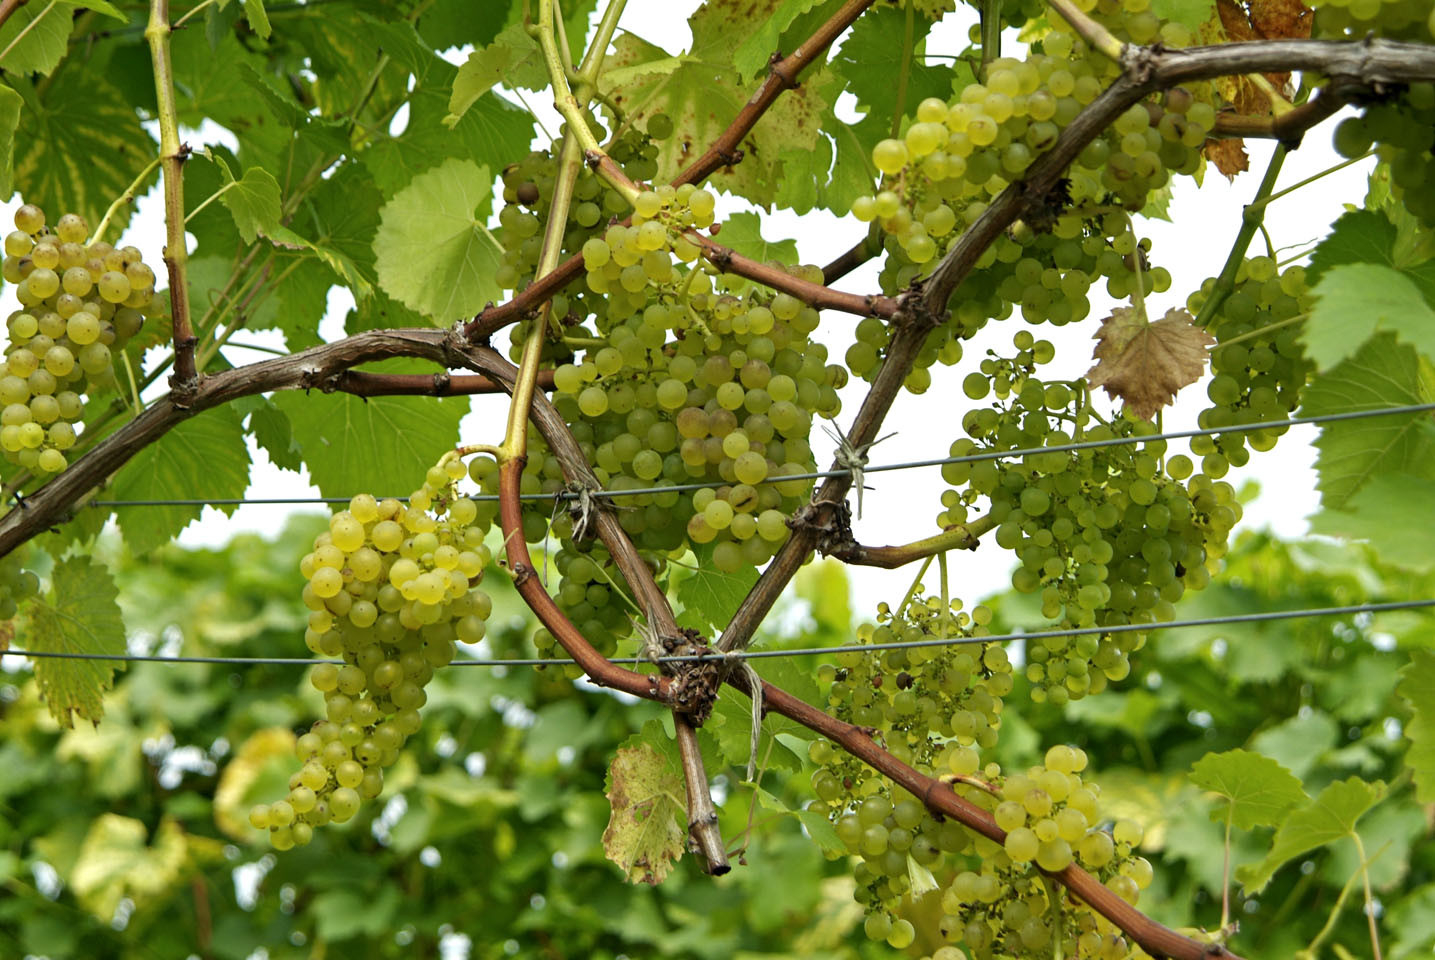 How To Grow Grapes / Rhs Gardening